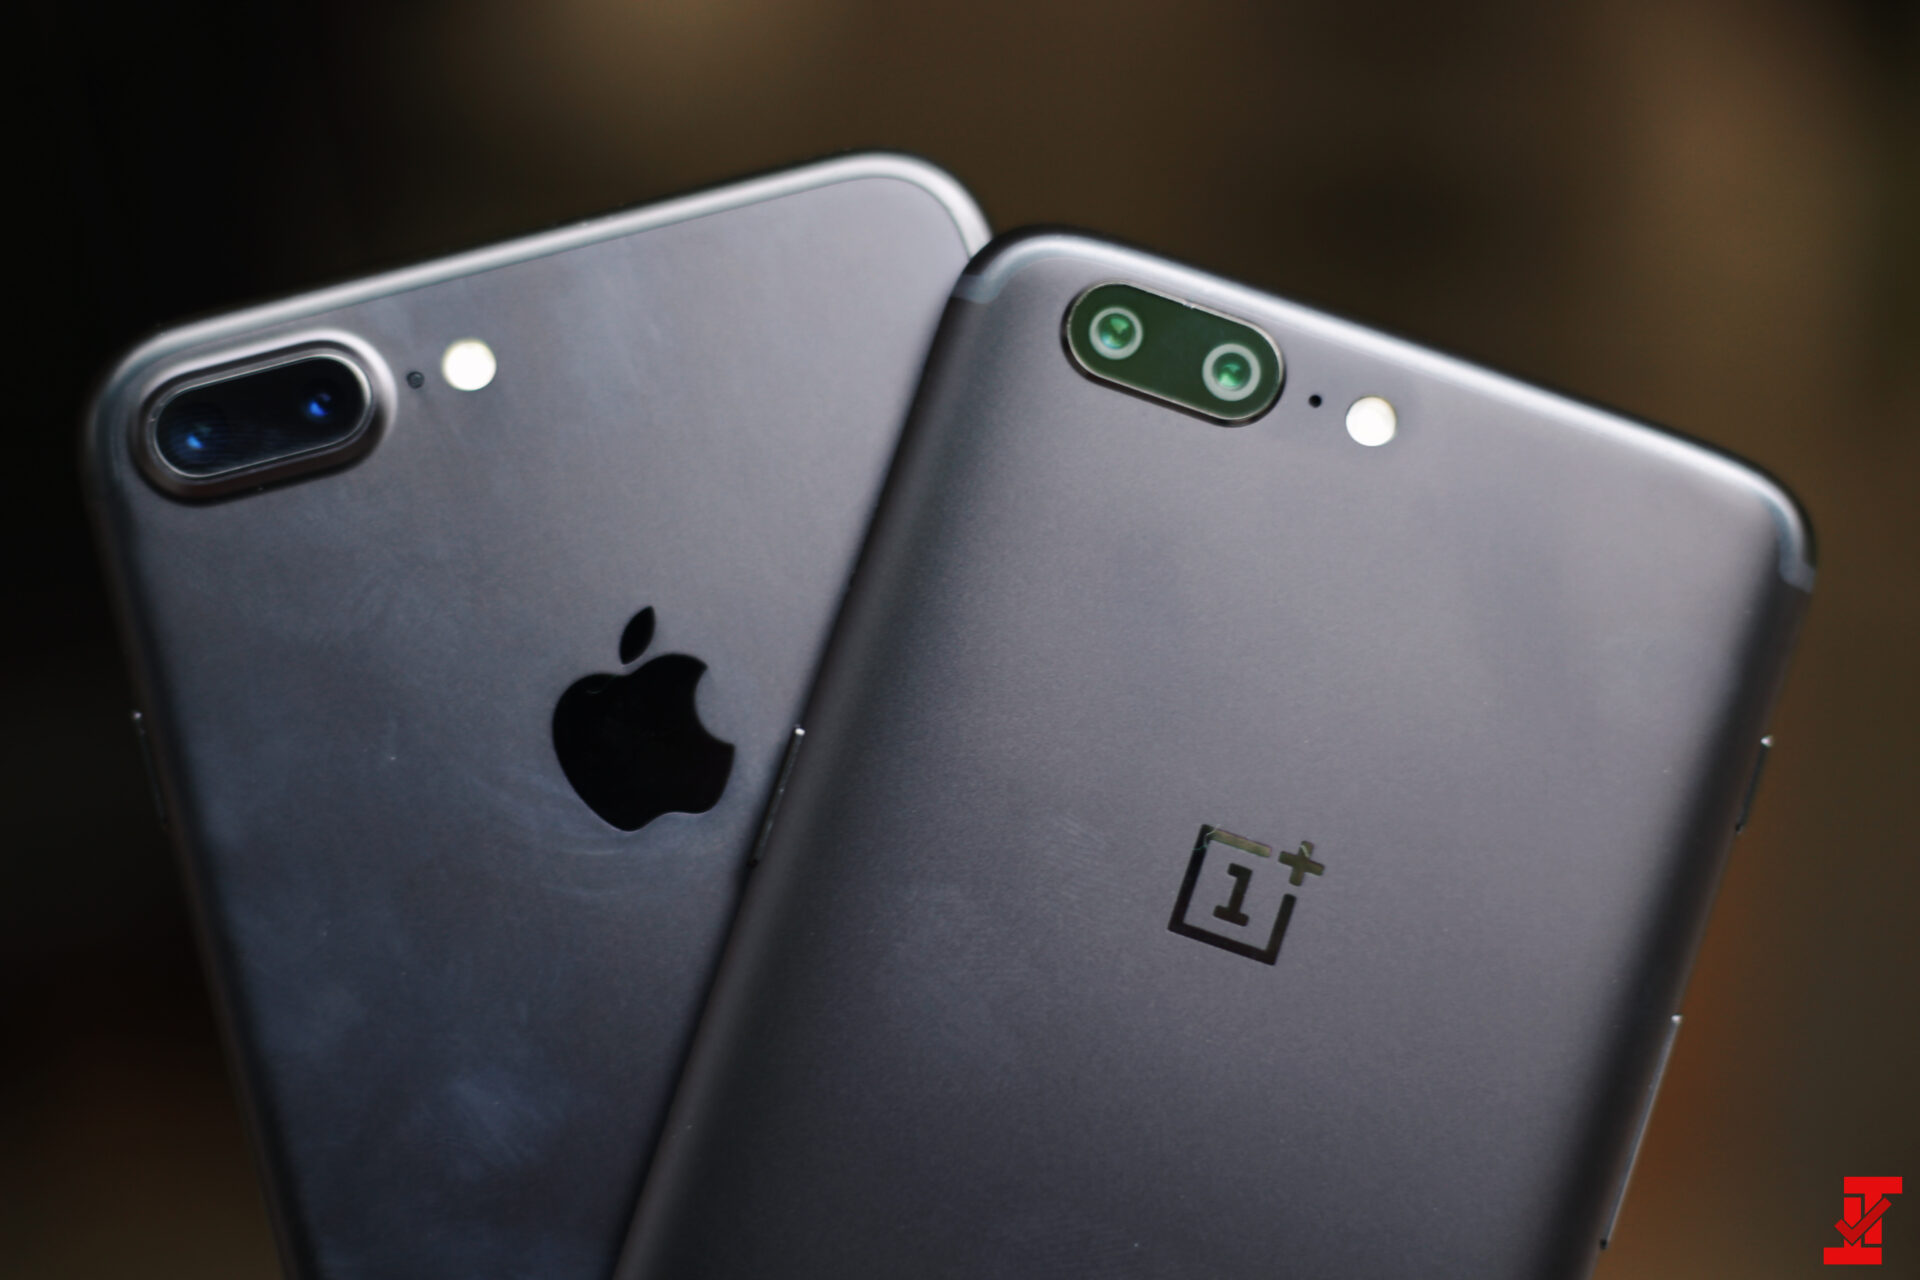 OnePlus 5 Vs Apple iPhone 7 Plus: Everything at a Glance!